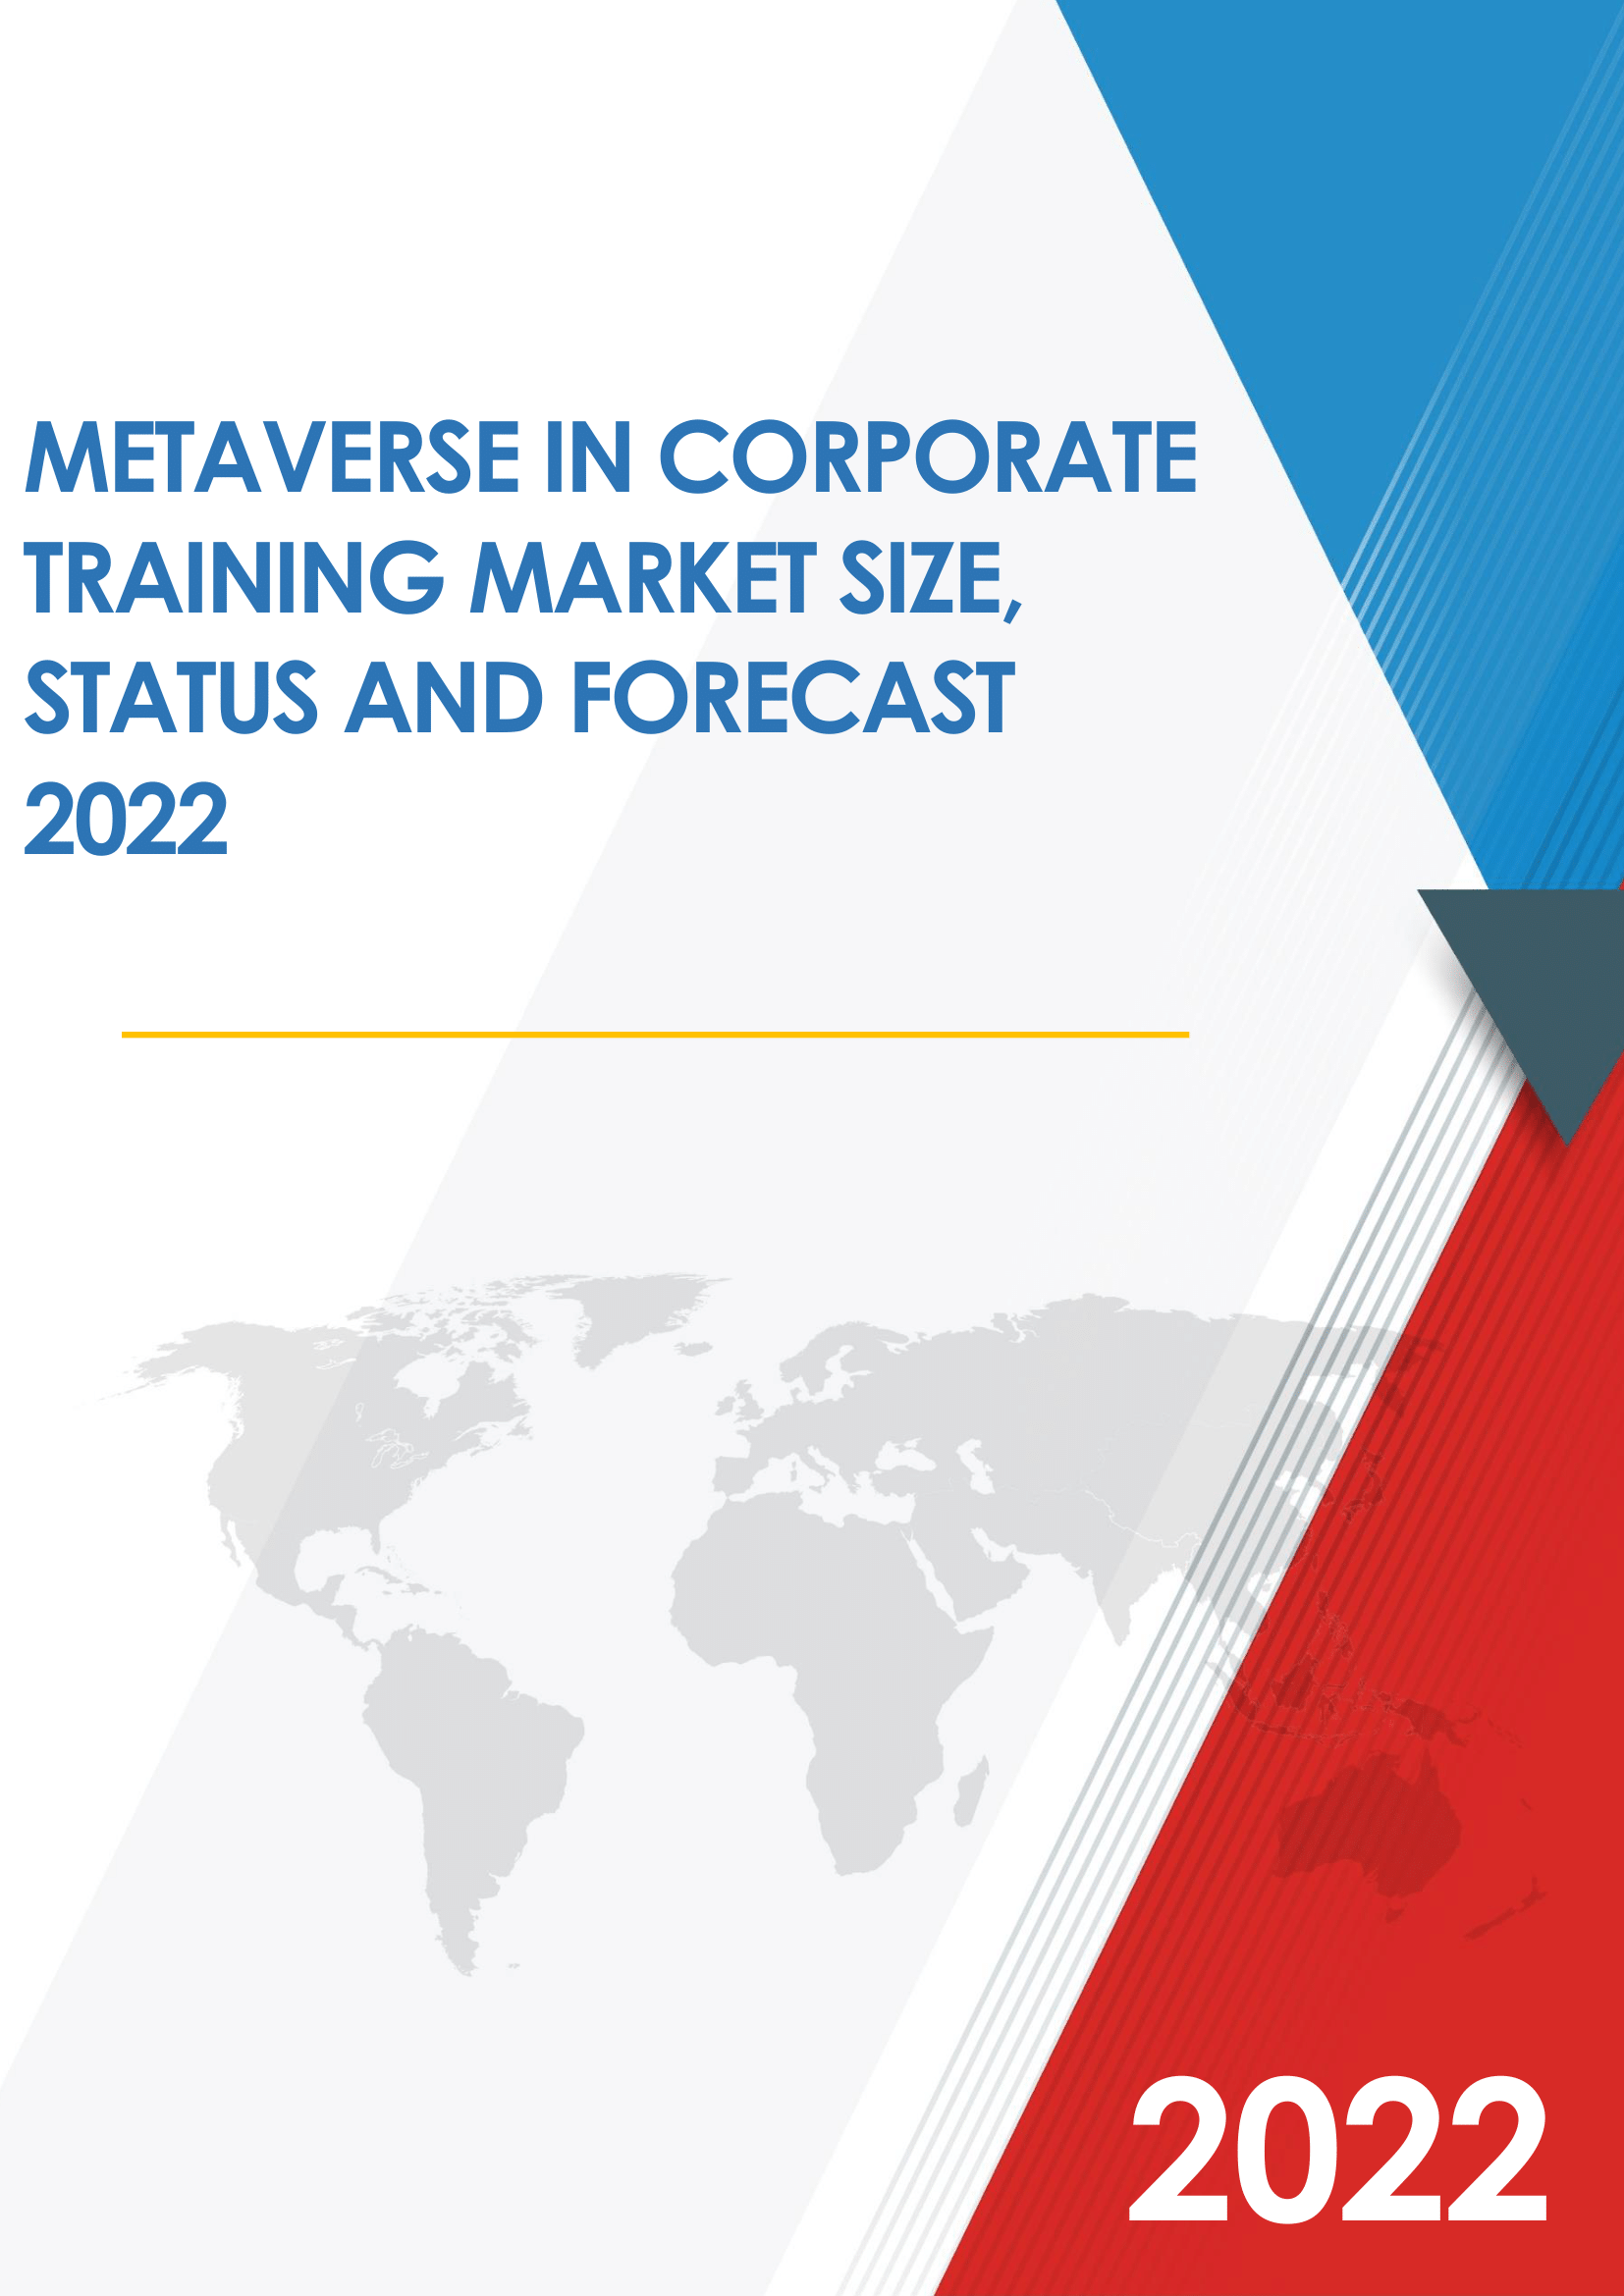 Global Metaverse in Corporate Training Market Research Report 2022